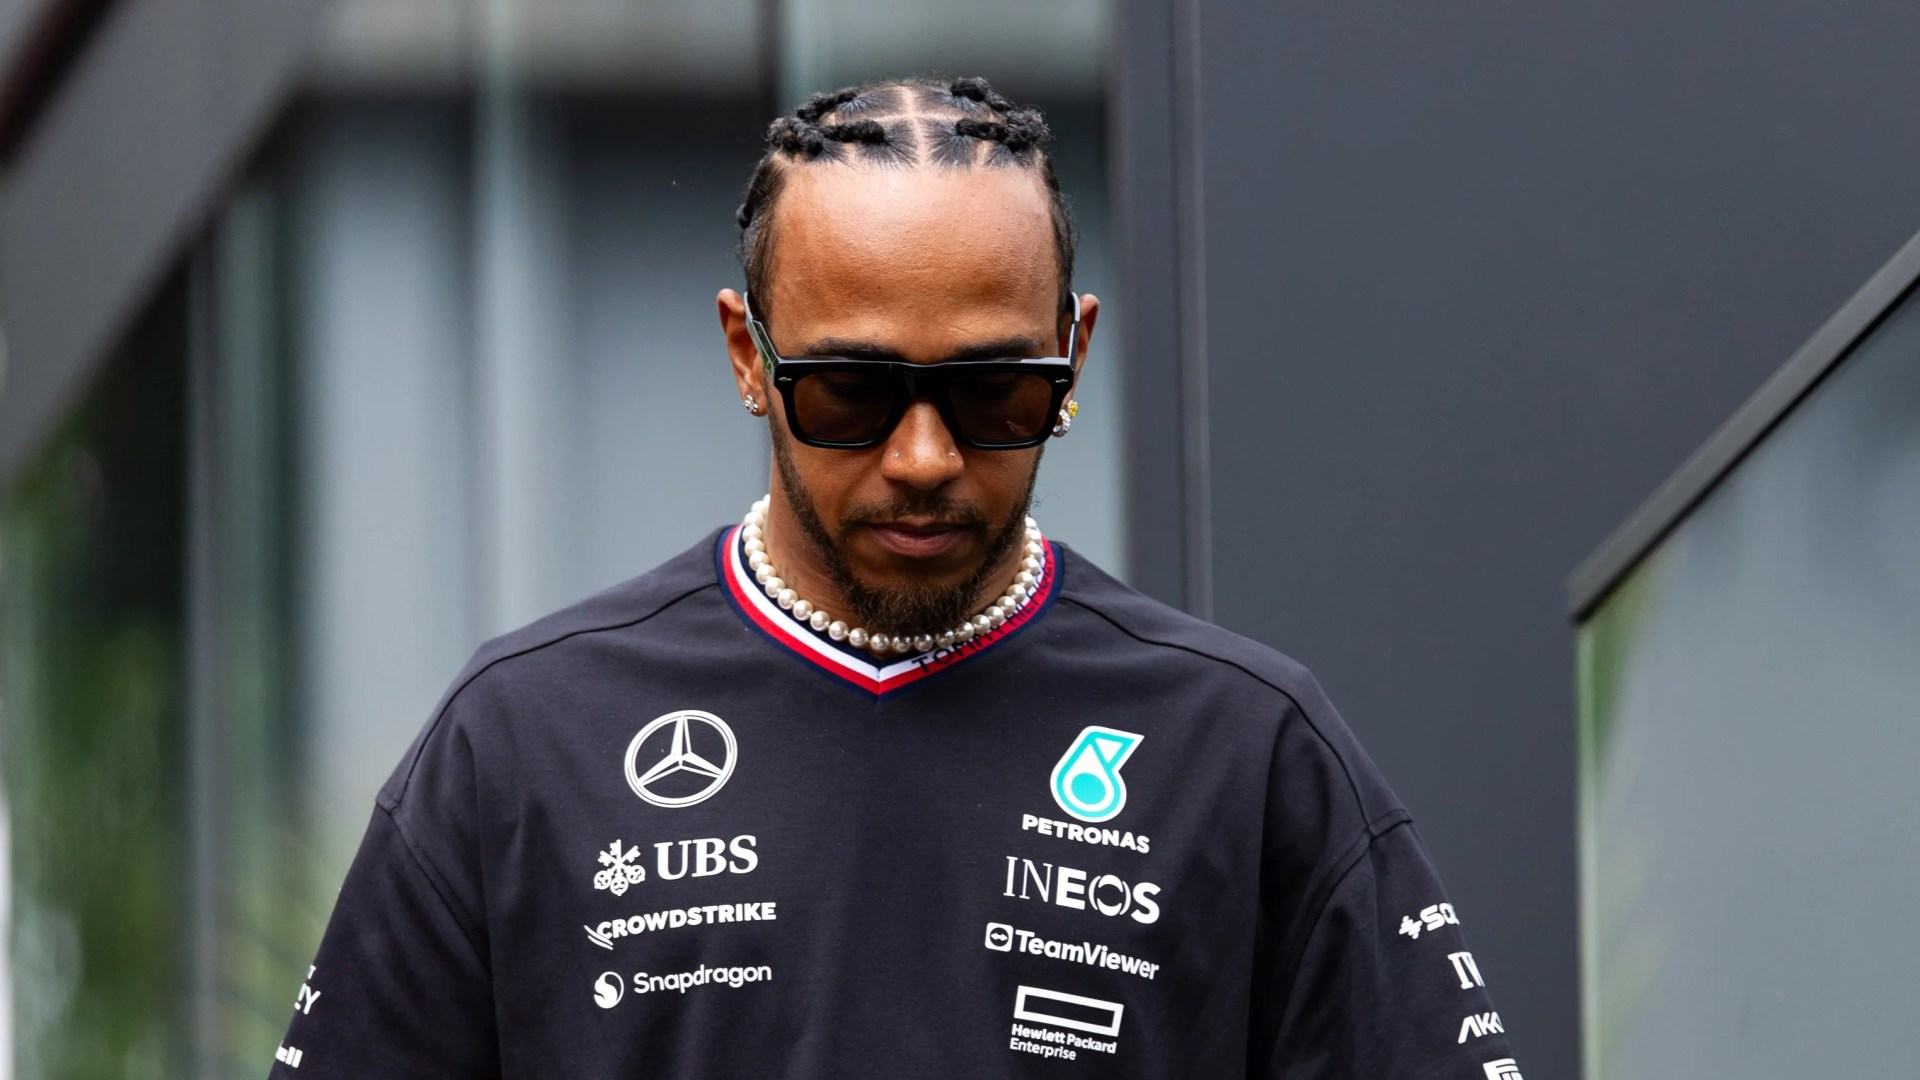 Lewis Hamilton grimaces as he ‘eats a DOG biscuit’ in NFL schedule release video for team F1 star part owns